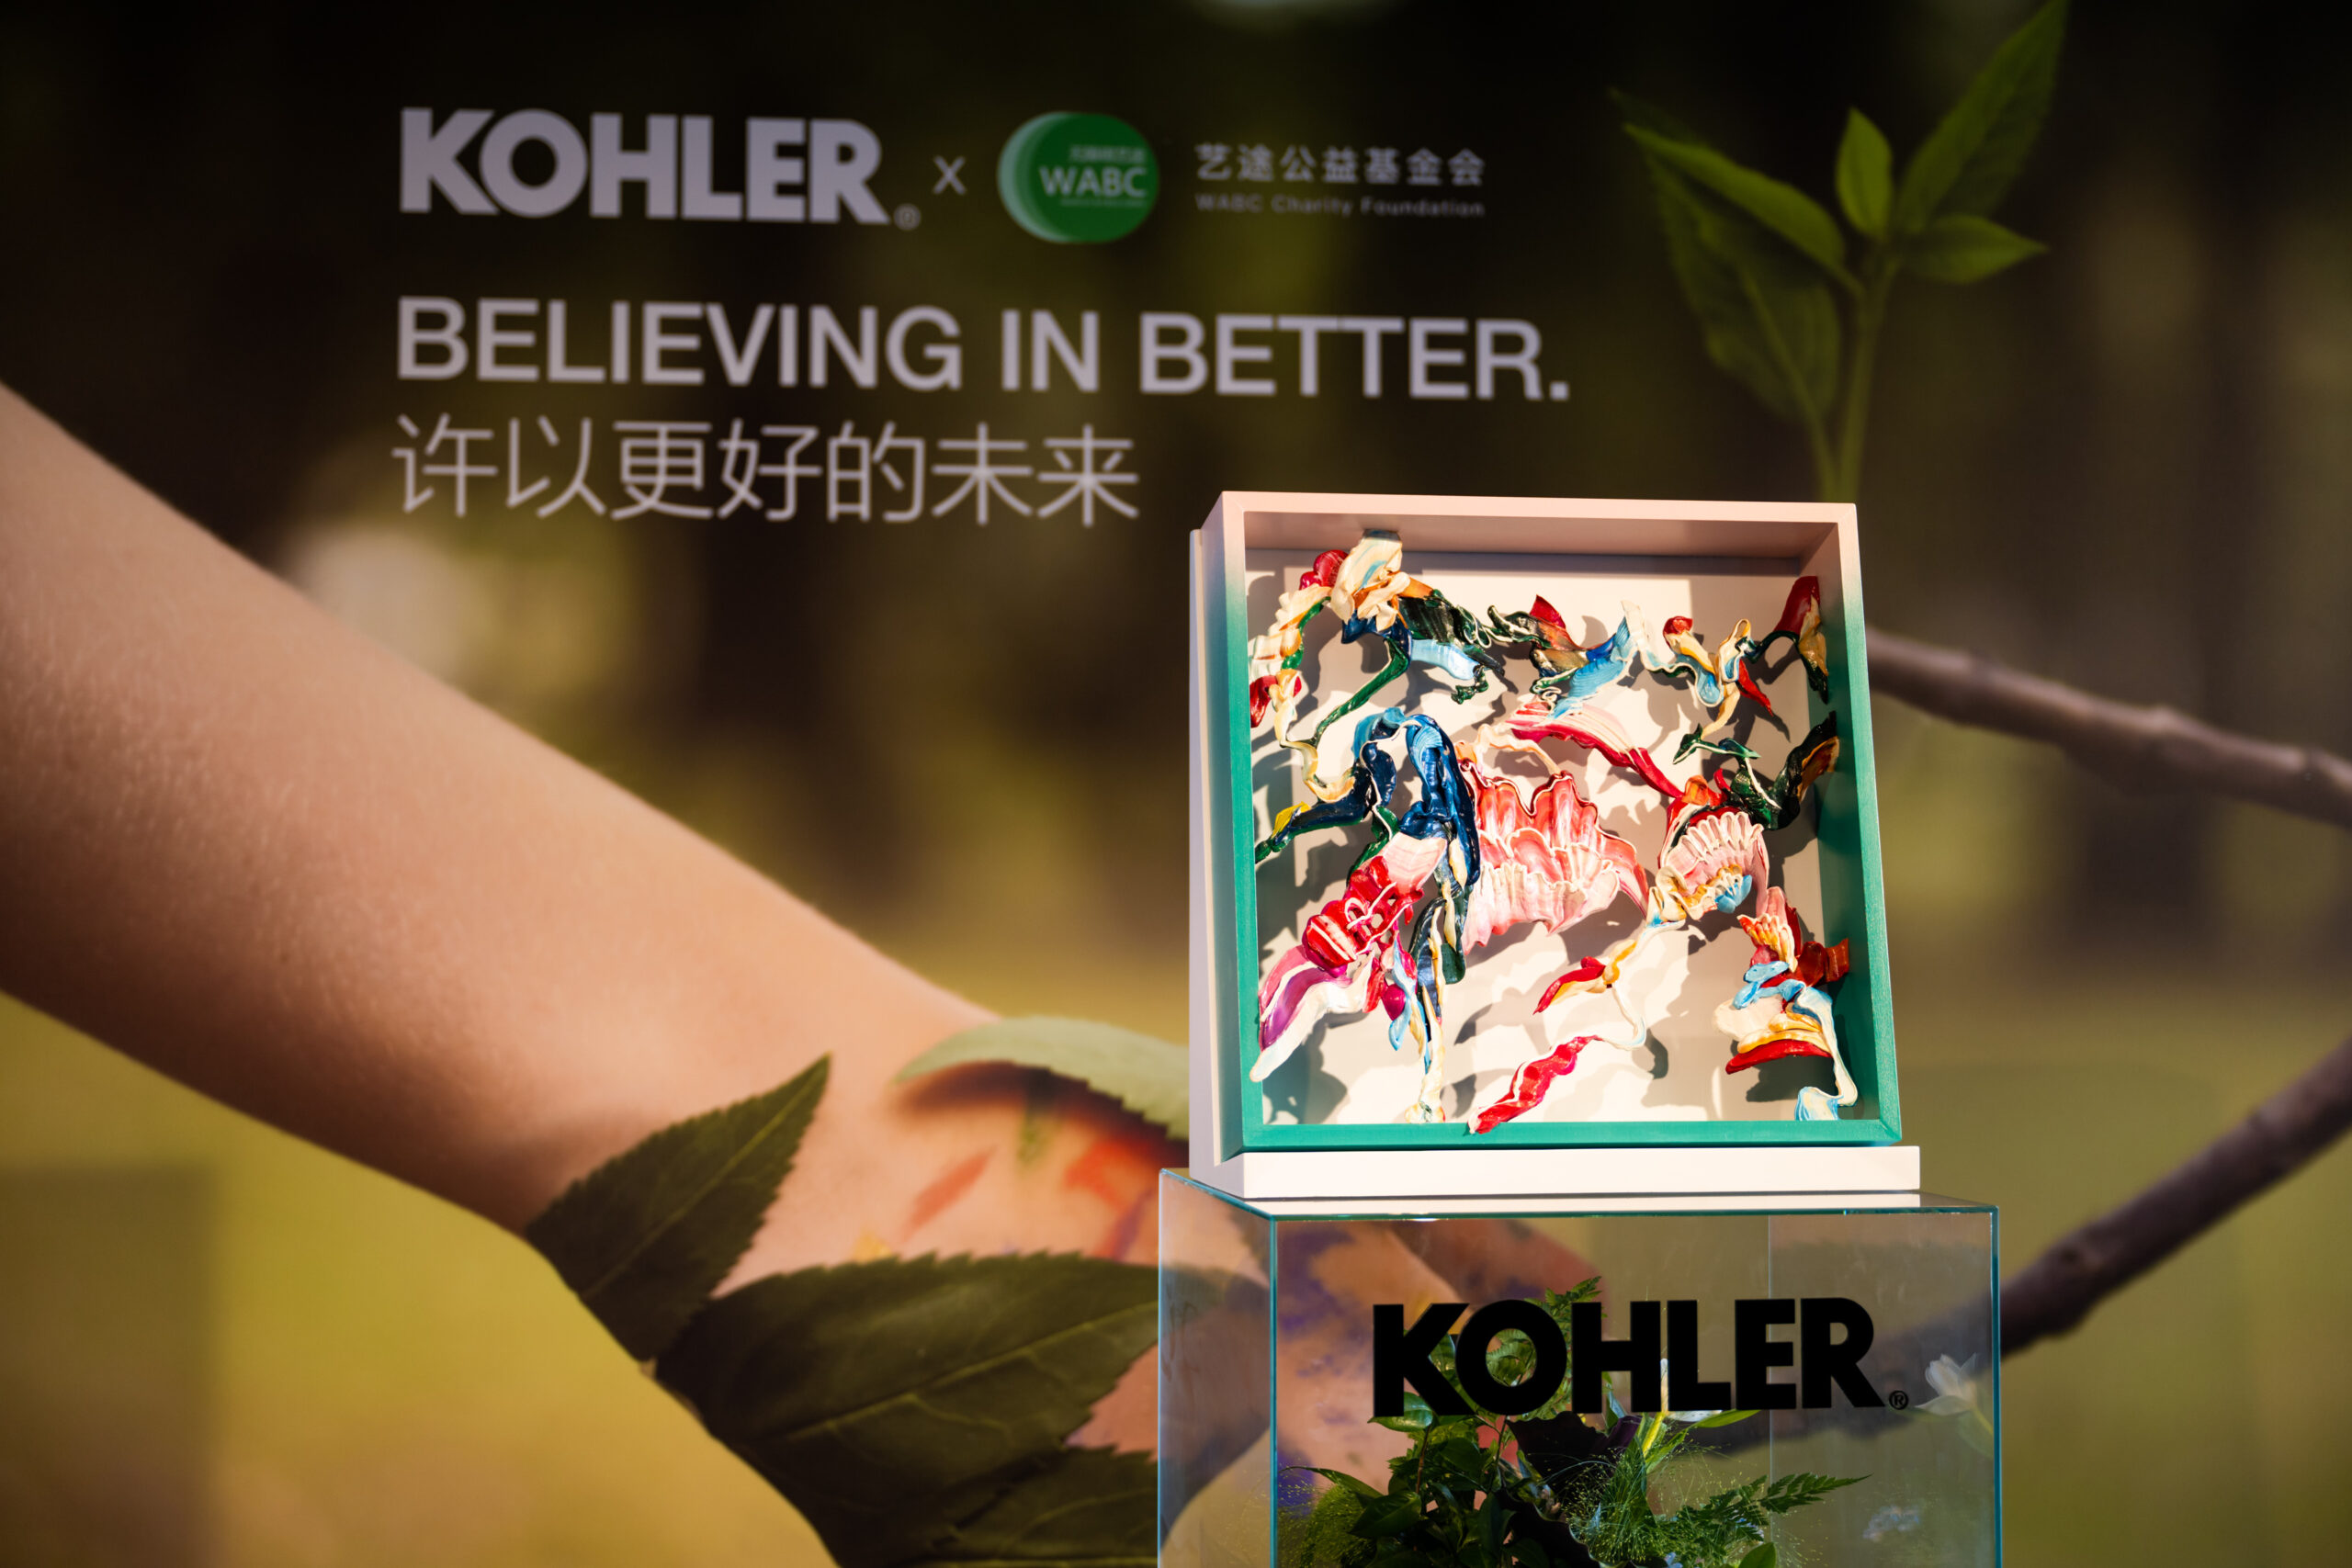 Ziling Wang's work 'Playground' as partnership with Kohler for children's charity WABC (World of Art Brut Culture)